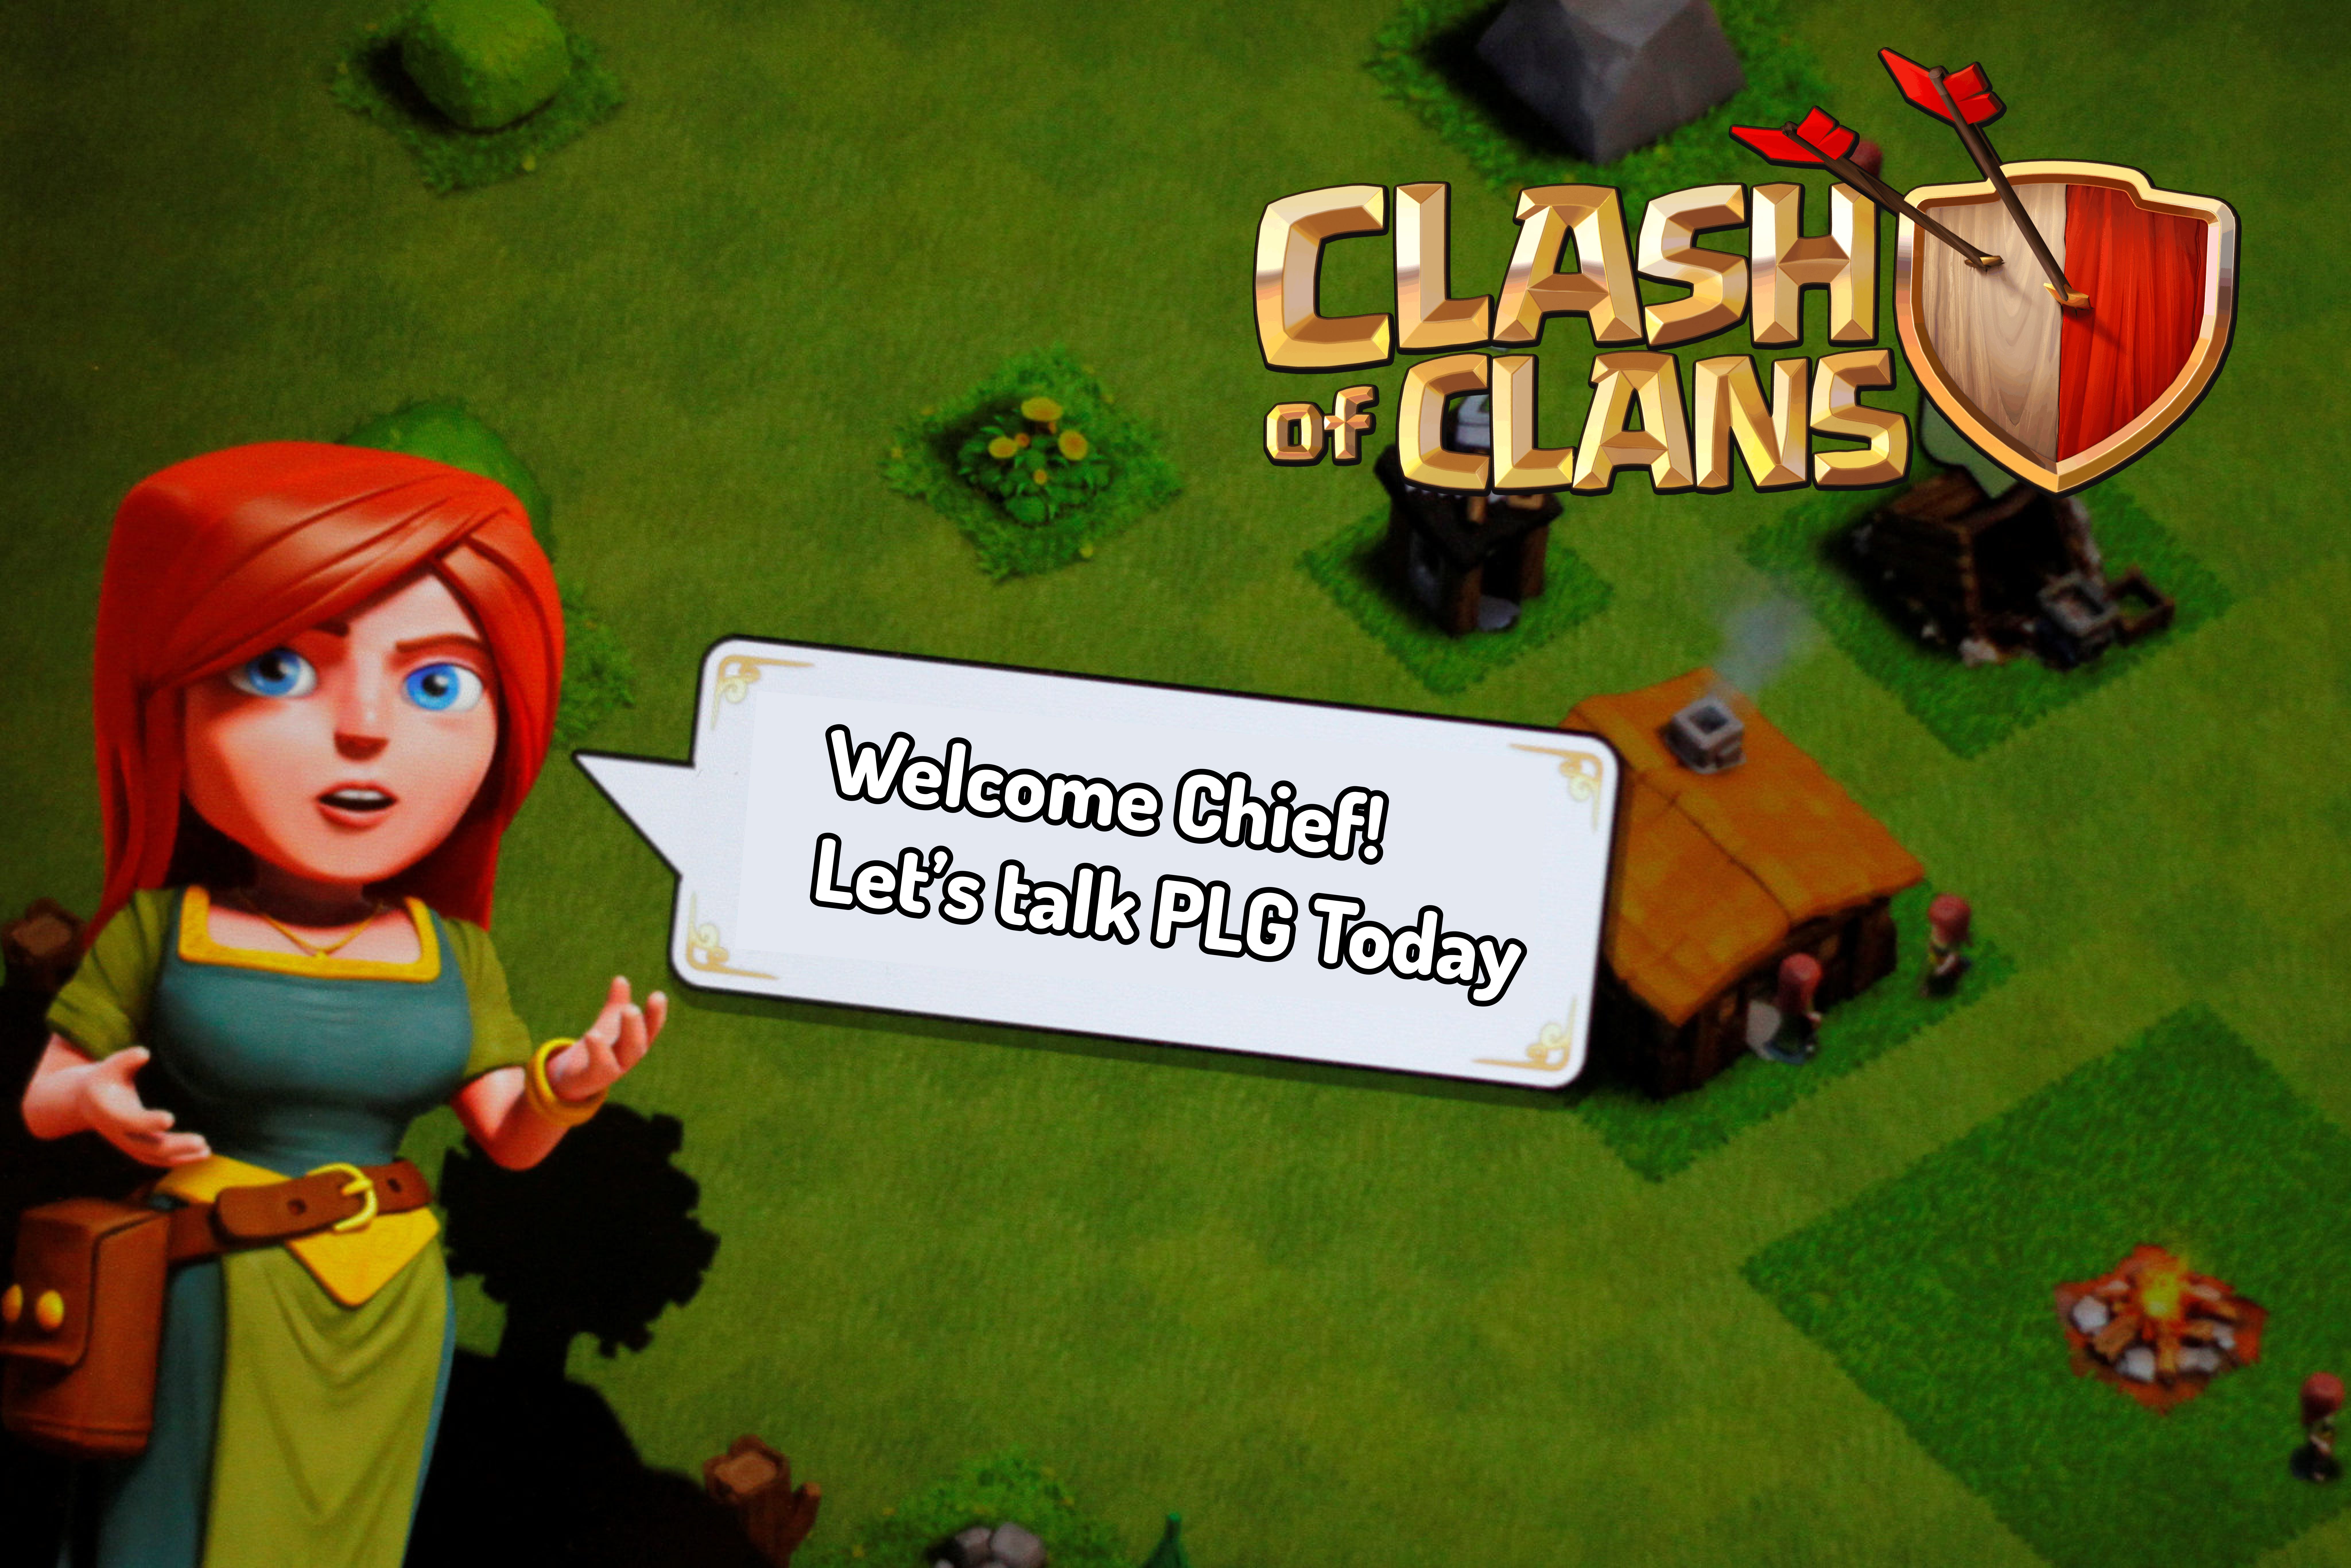 How To Recover Coc Facebook Account in 2023 - Clash of Clans Facebook Login